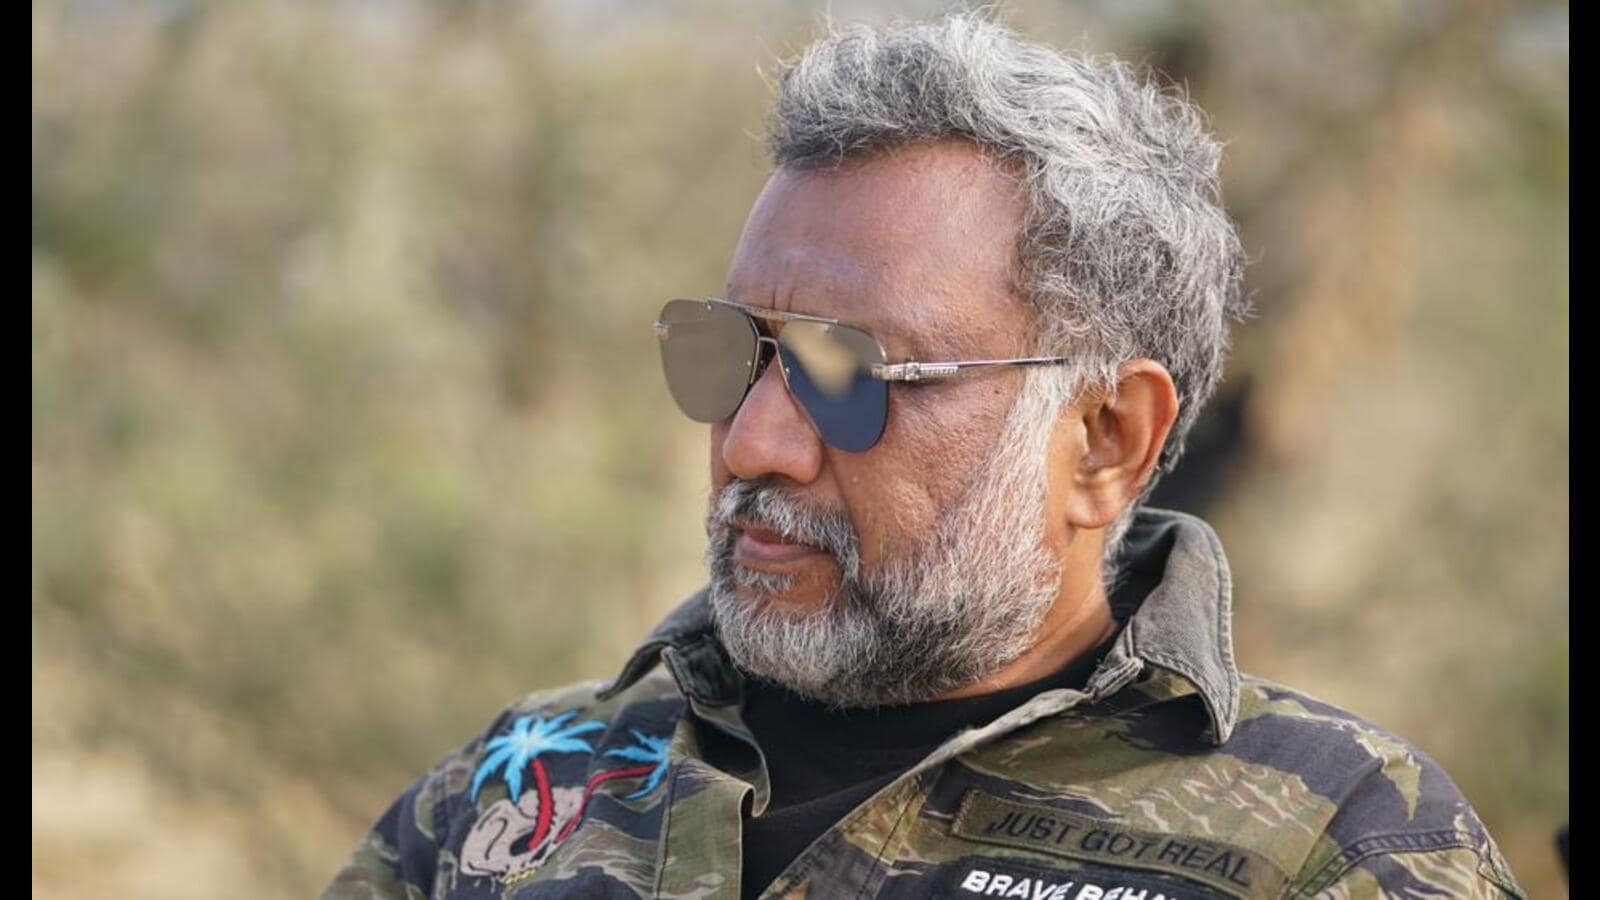 Theatrical release has now become tougher: Anubhav Sinha